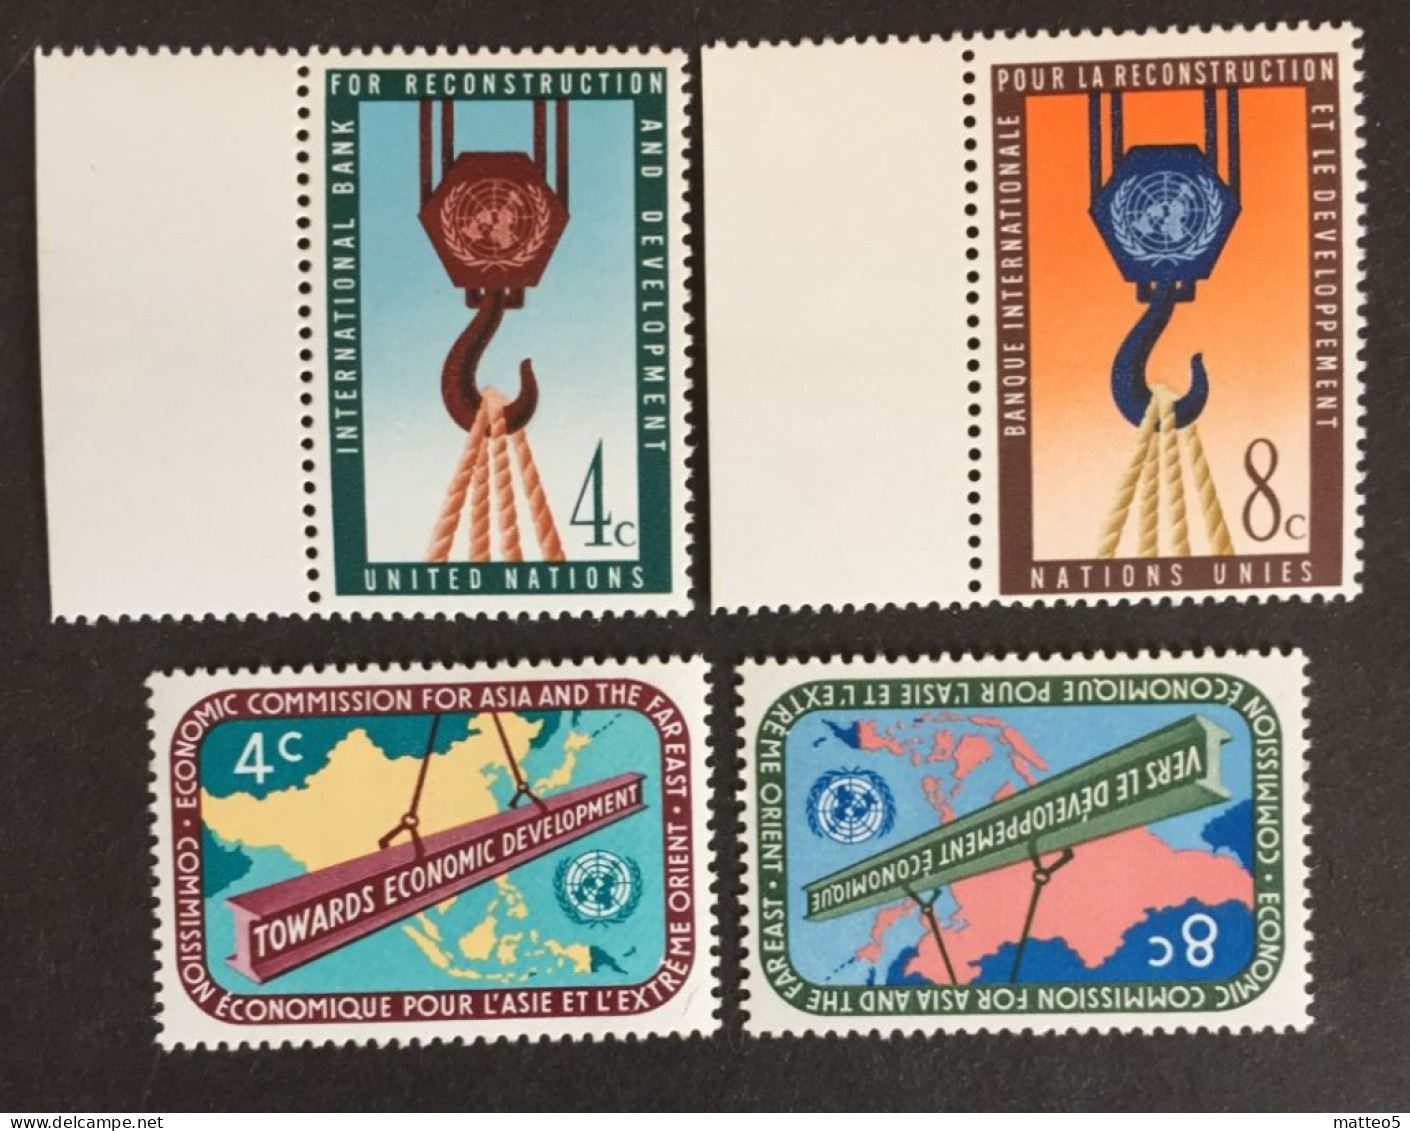 1960 - United Nations UNO UN -Int. Bank For Construction And Economic Commission For Asia -  Unused - Unused Stamps